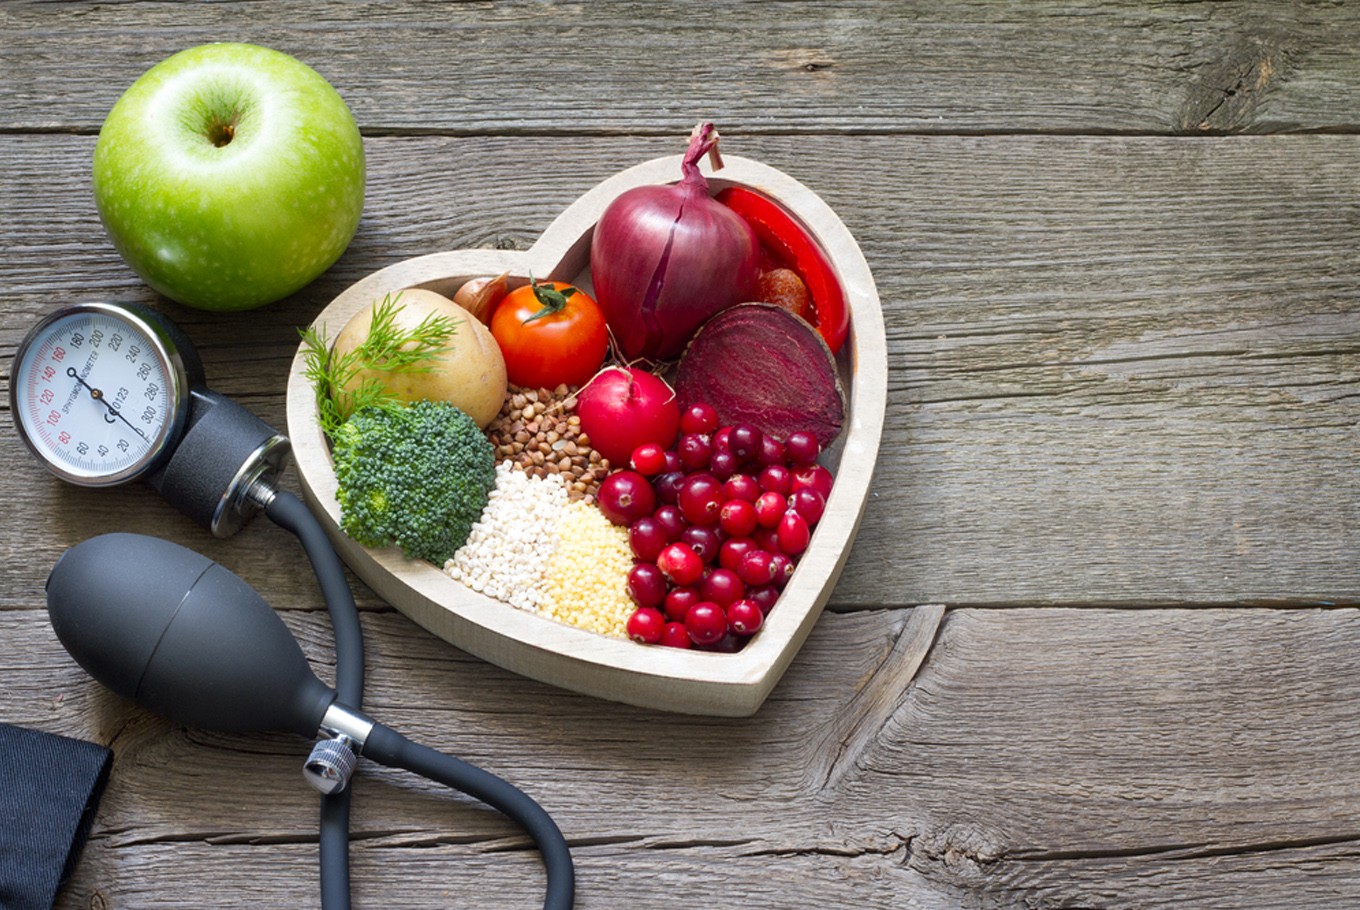 Which is better to improve heart health: diet or exercise?